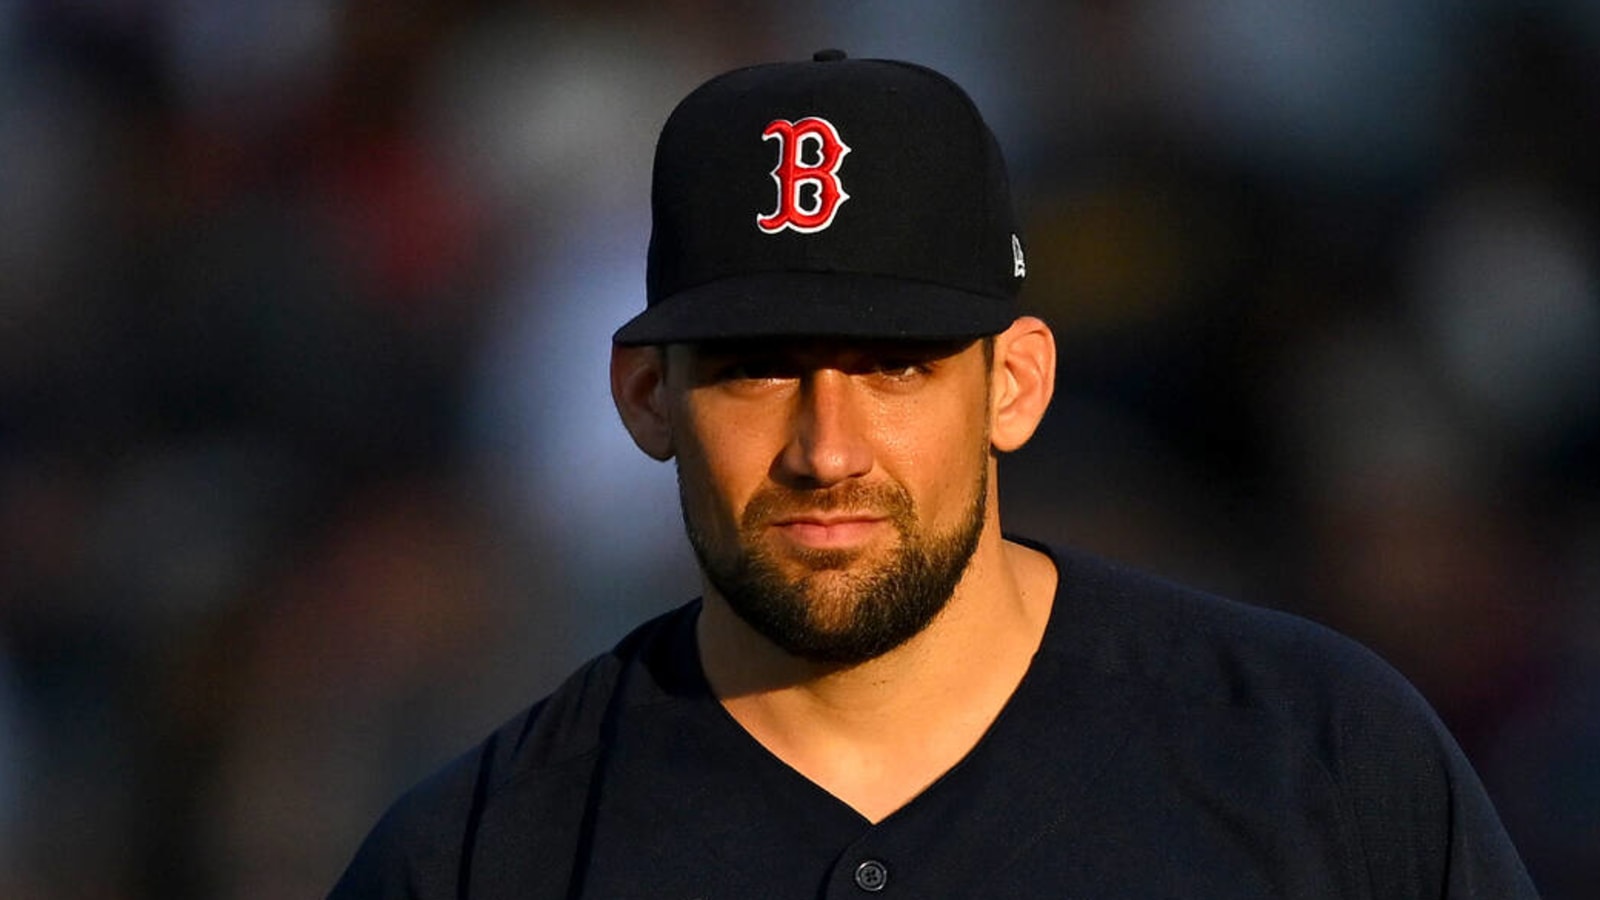 Red Sox place pitcher Eovaldi on 15-day IL with back inflammation